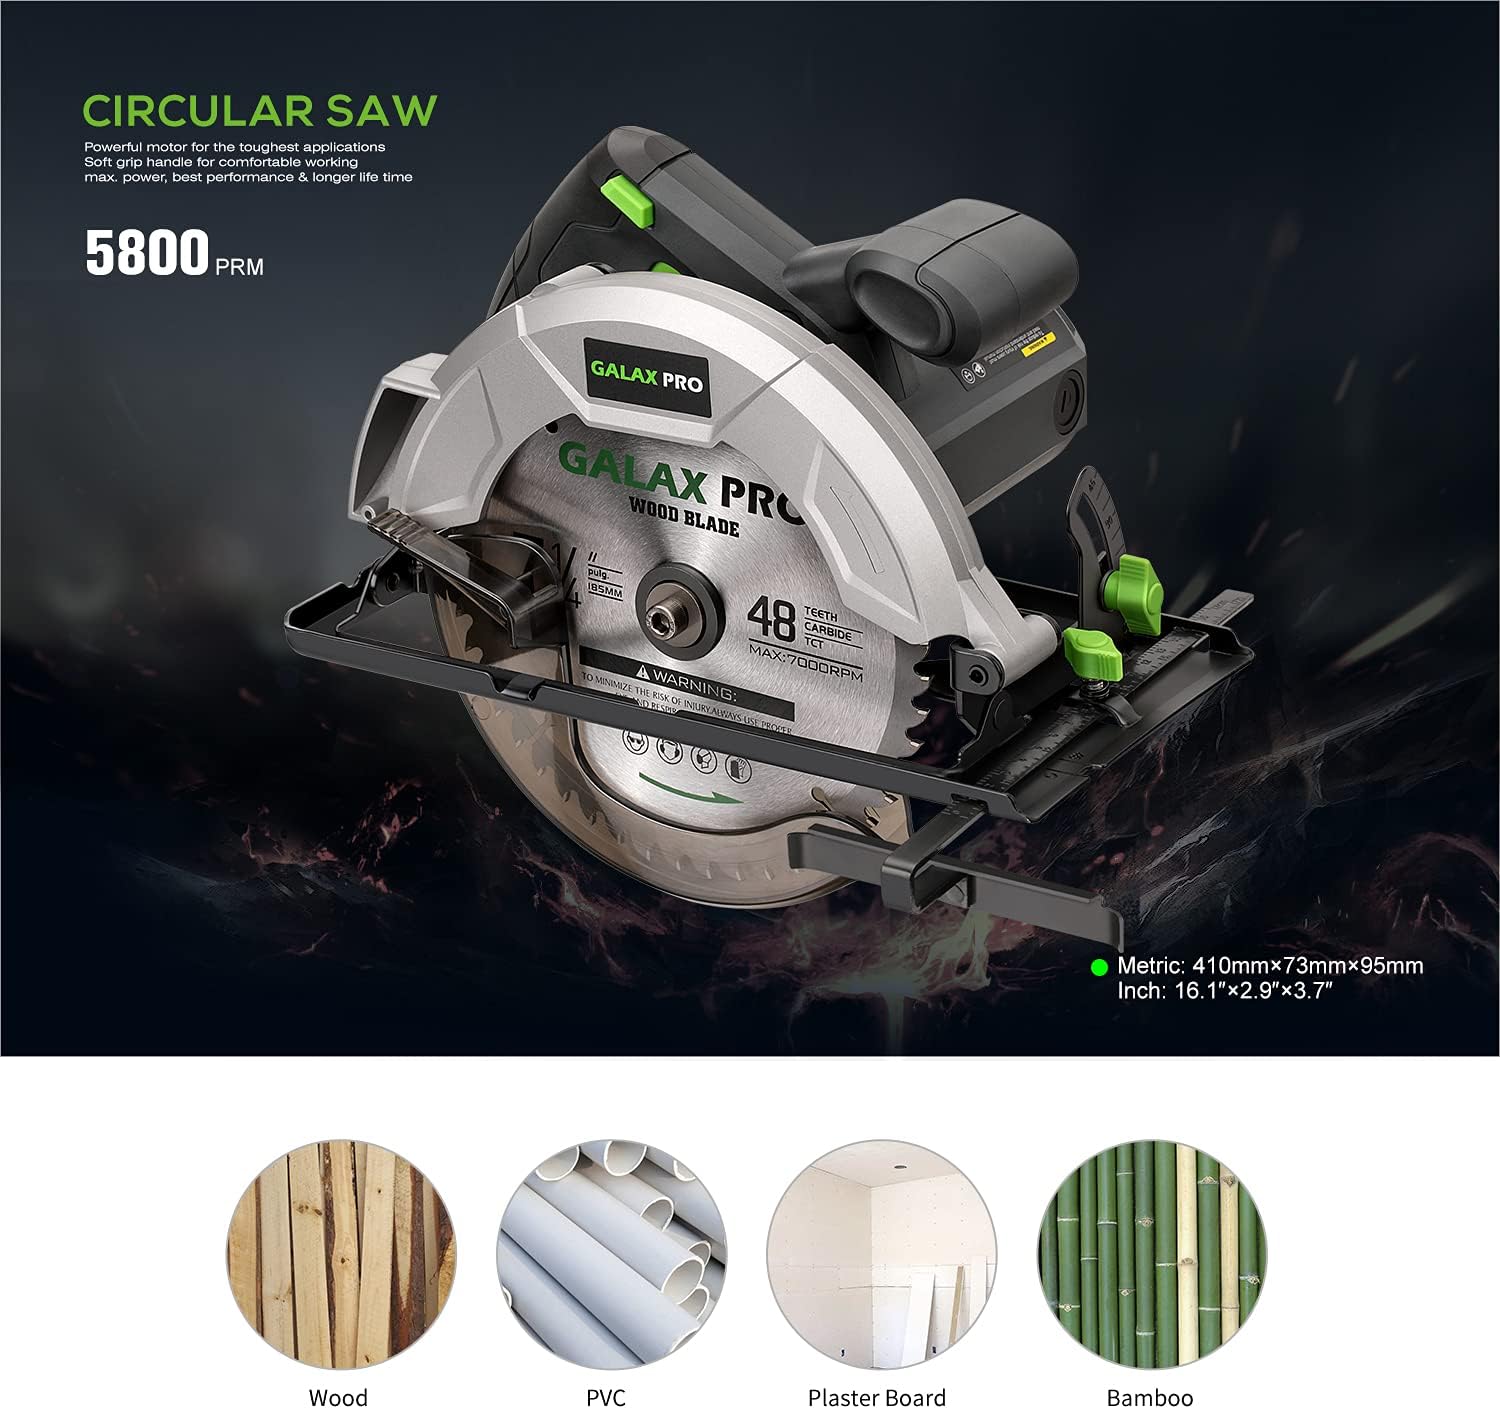 GALAX PRO Circular Saw 5800 RPM Hand-Held Cord Circular Saw, 10 Amp with 7-1/4 Inch Blade, Adjustable Cutting Depth (1-5/8" to 2-1/2